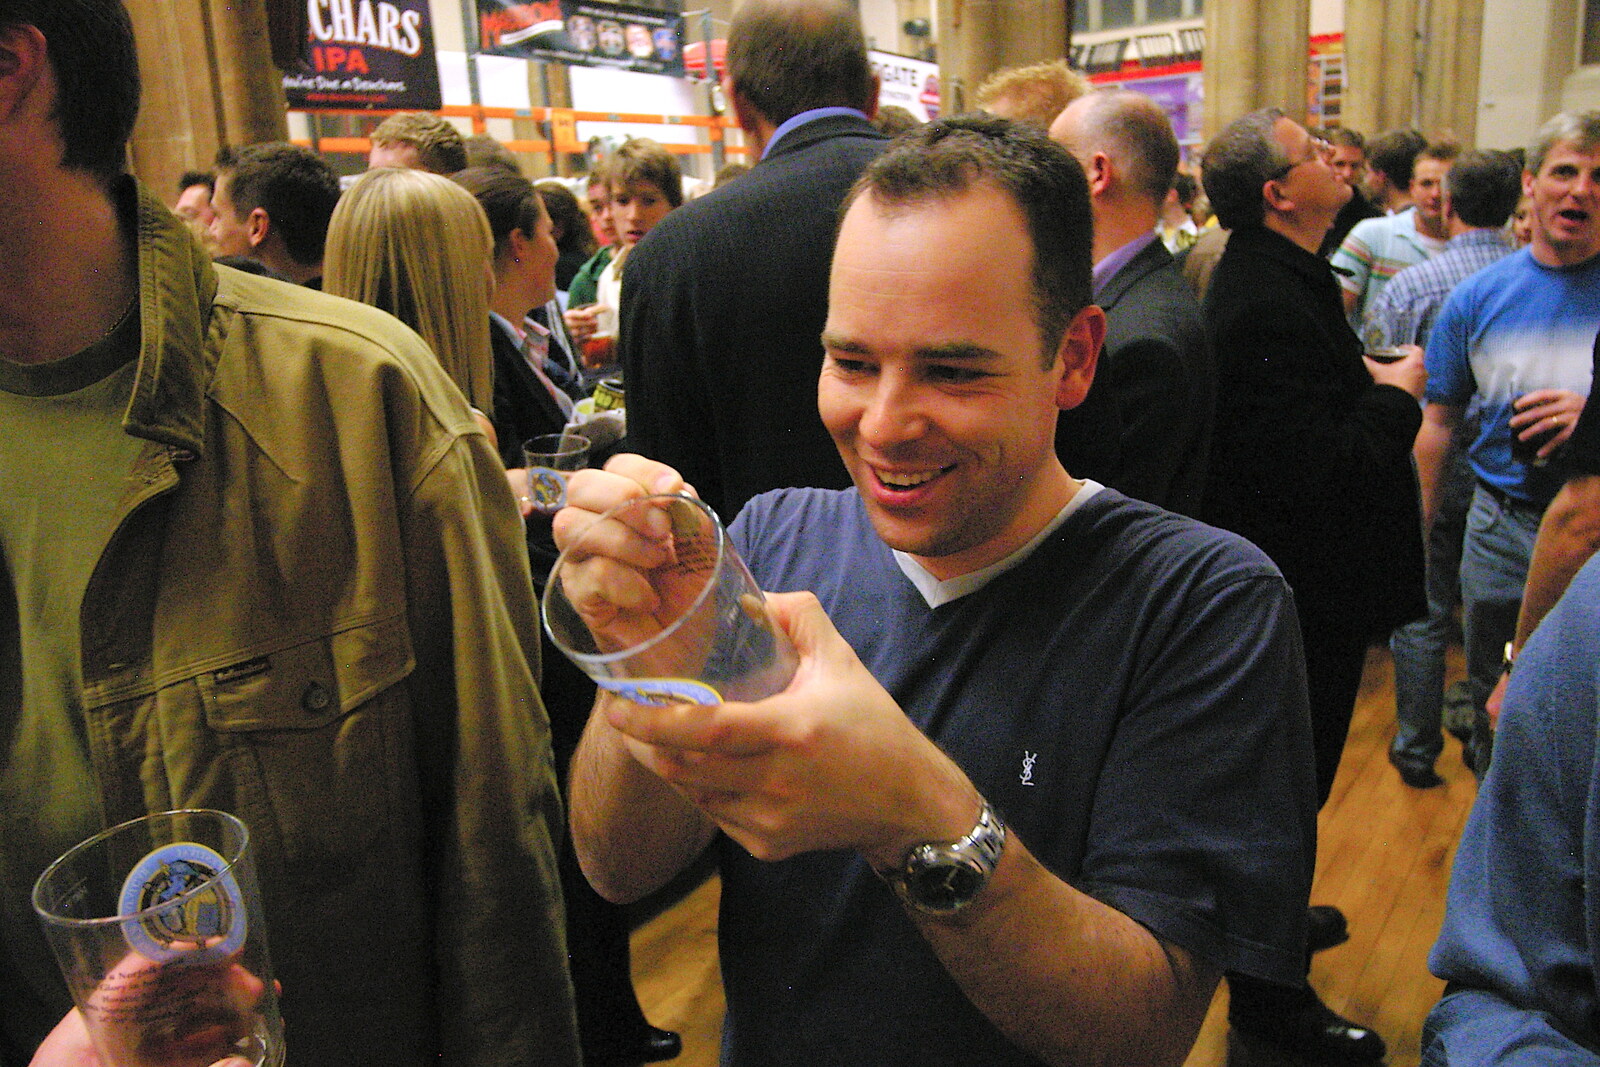 The 28th Norwich Beer Festival, St. Andrew's Hall, Norwich - 26th October 2005: Russell tries to scratch off a Norwich quote